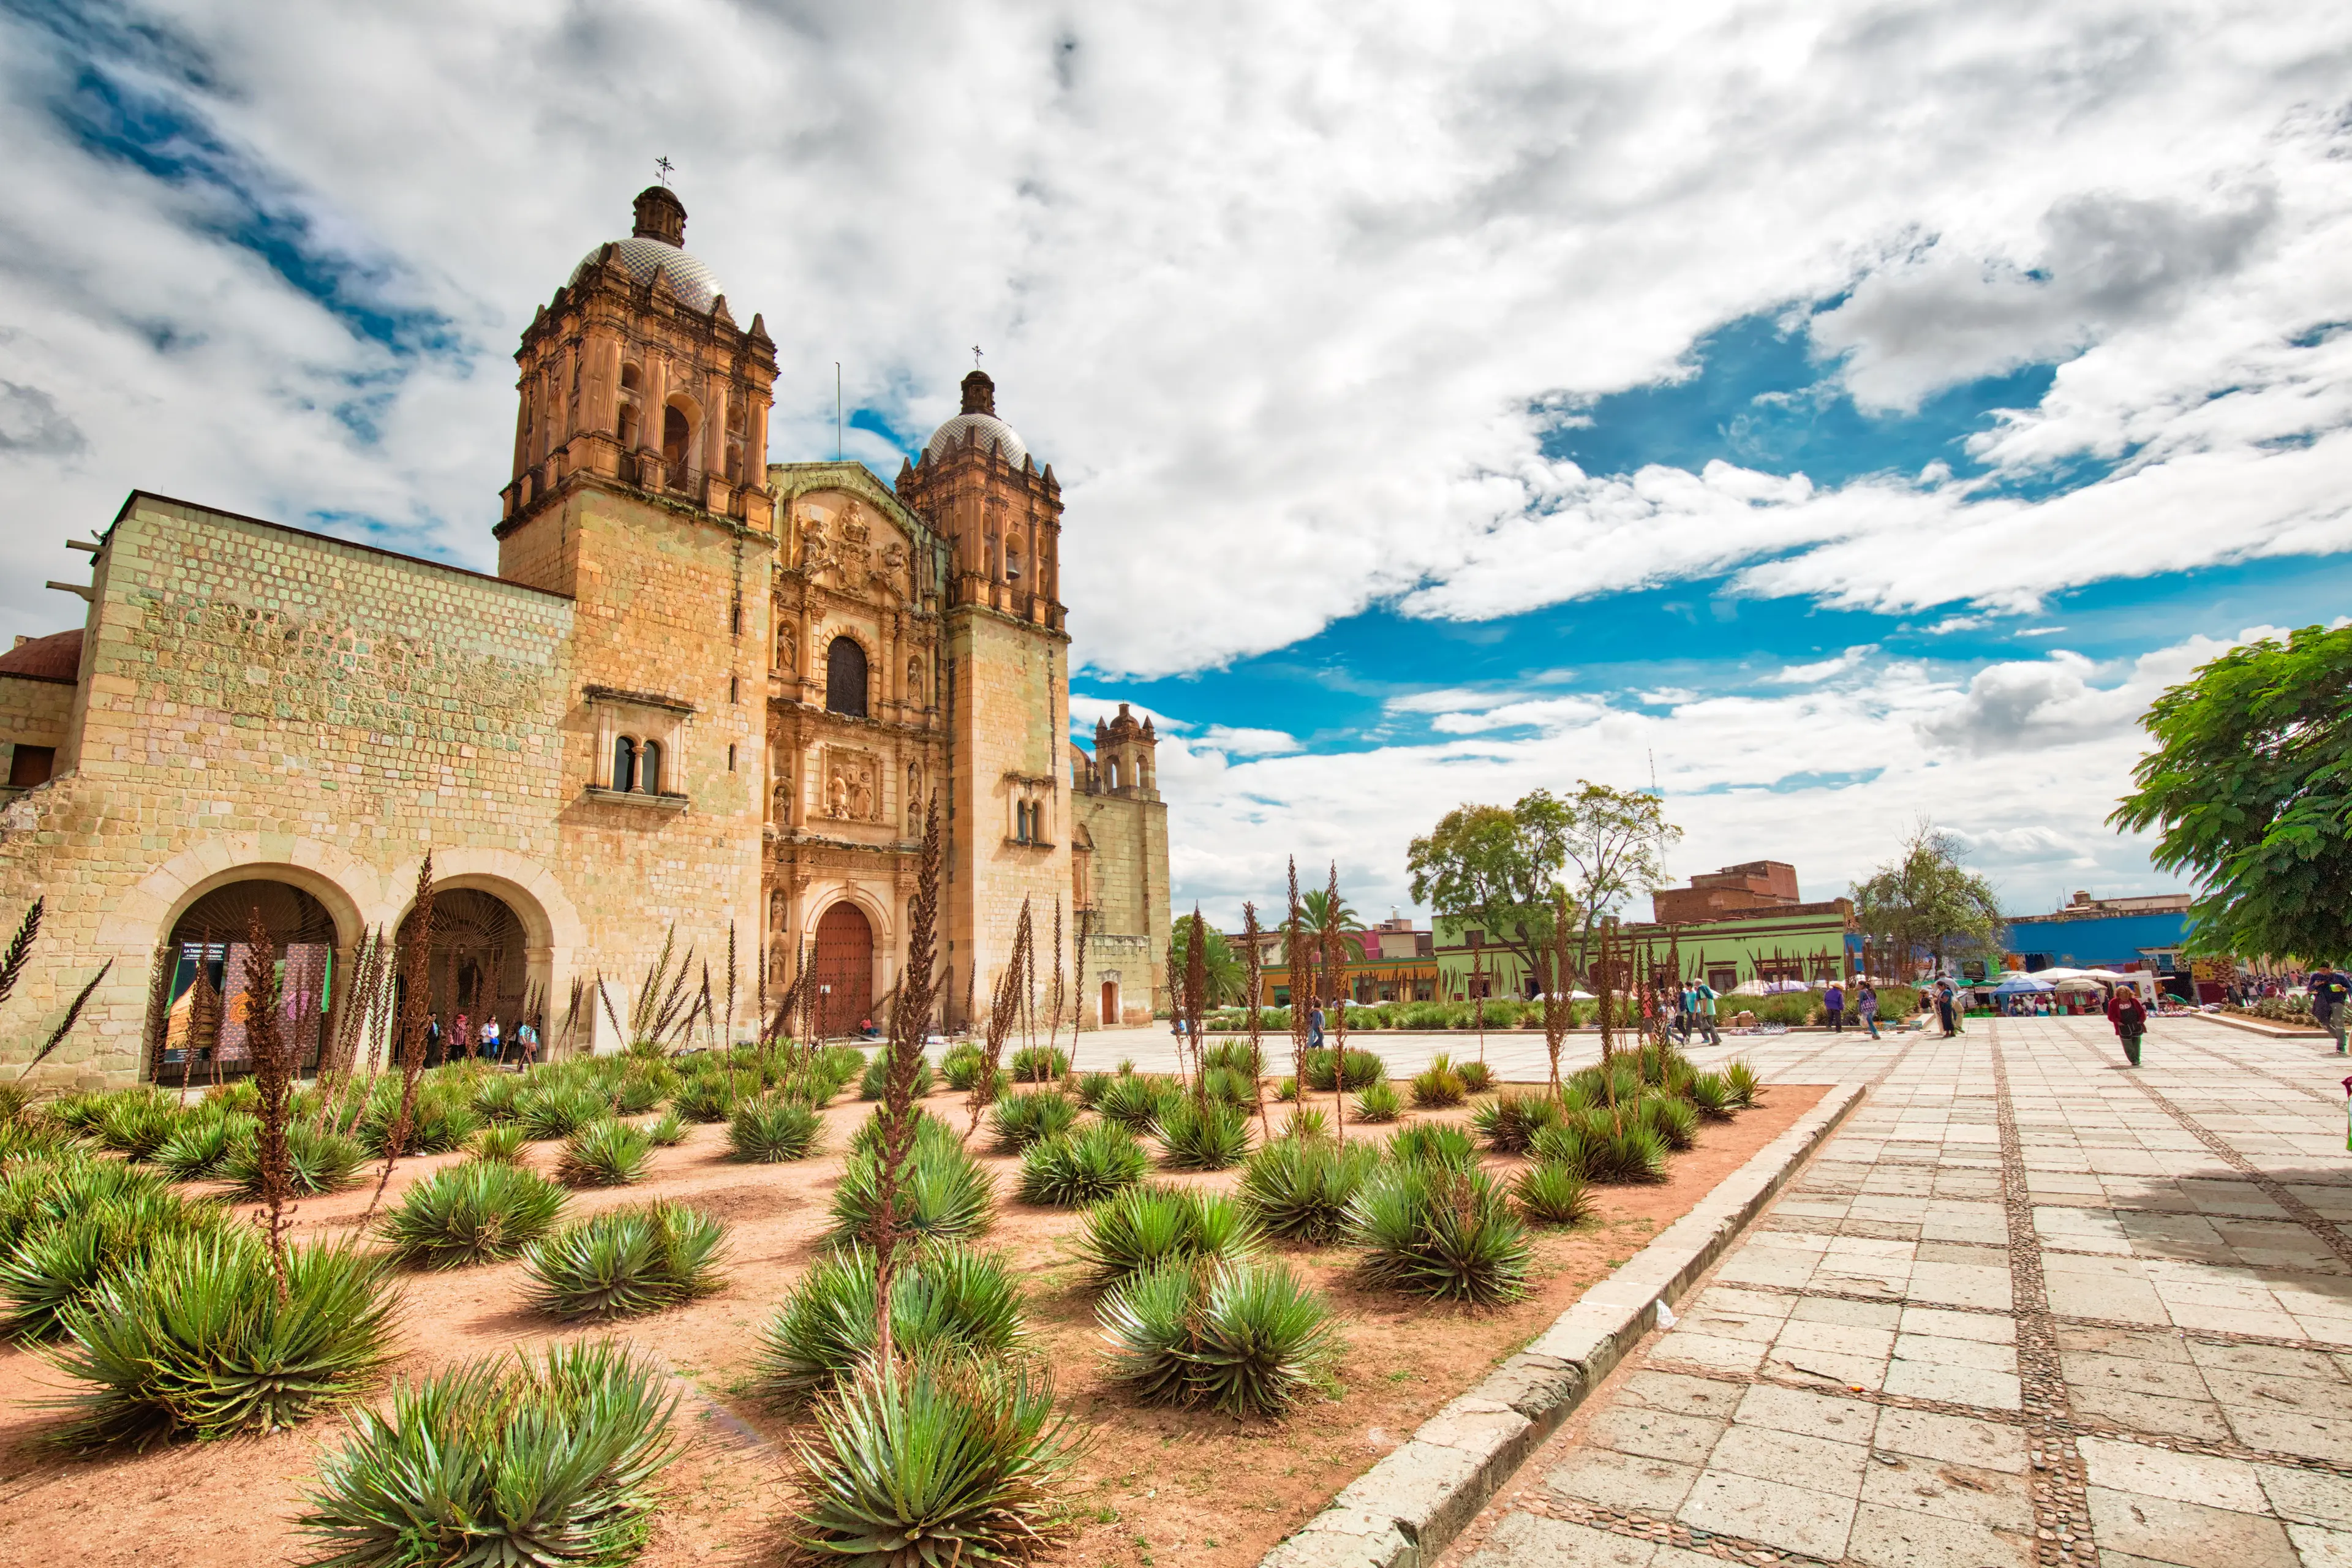 3-Day Adventure & Culinary Offbeat Experience in Oaxaca with Friends